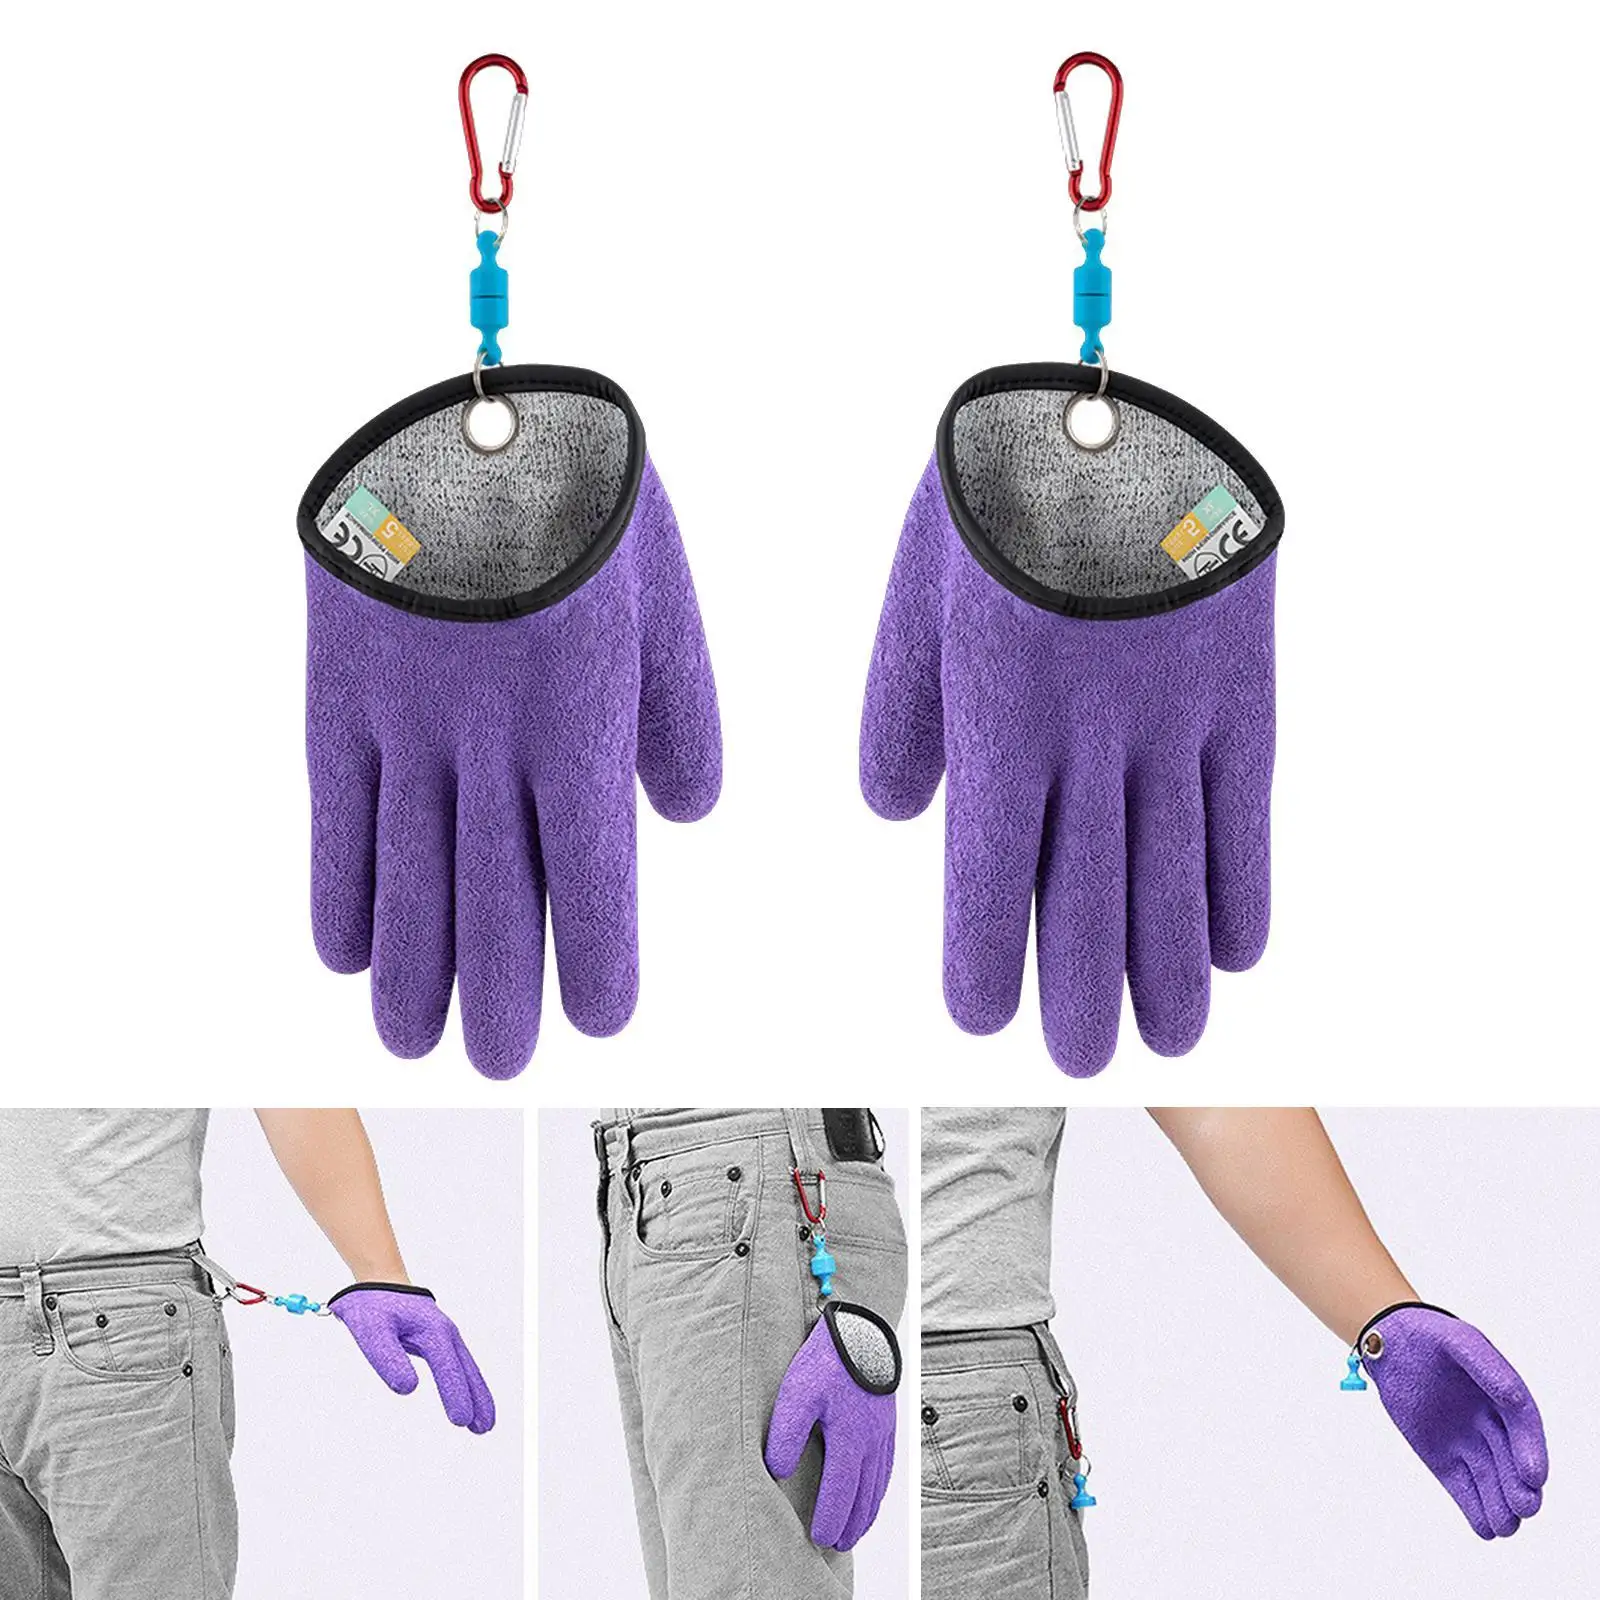 Fishing Puncture Proof Gloves with Magnet Release Waterproof Fish Glove